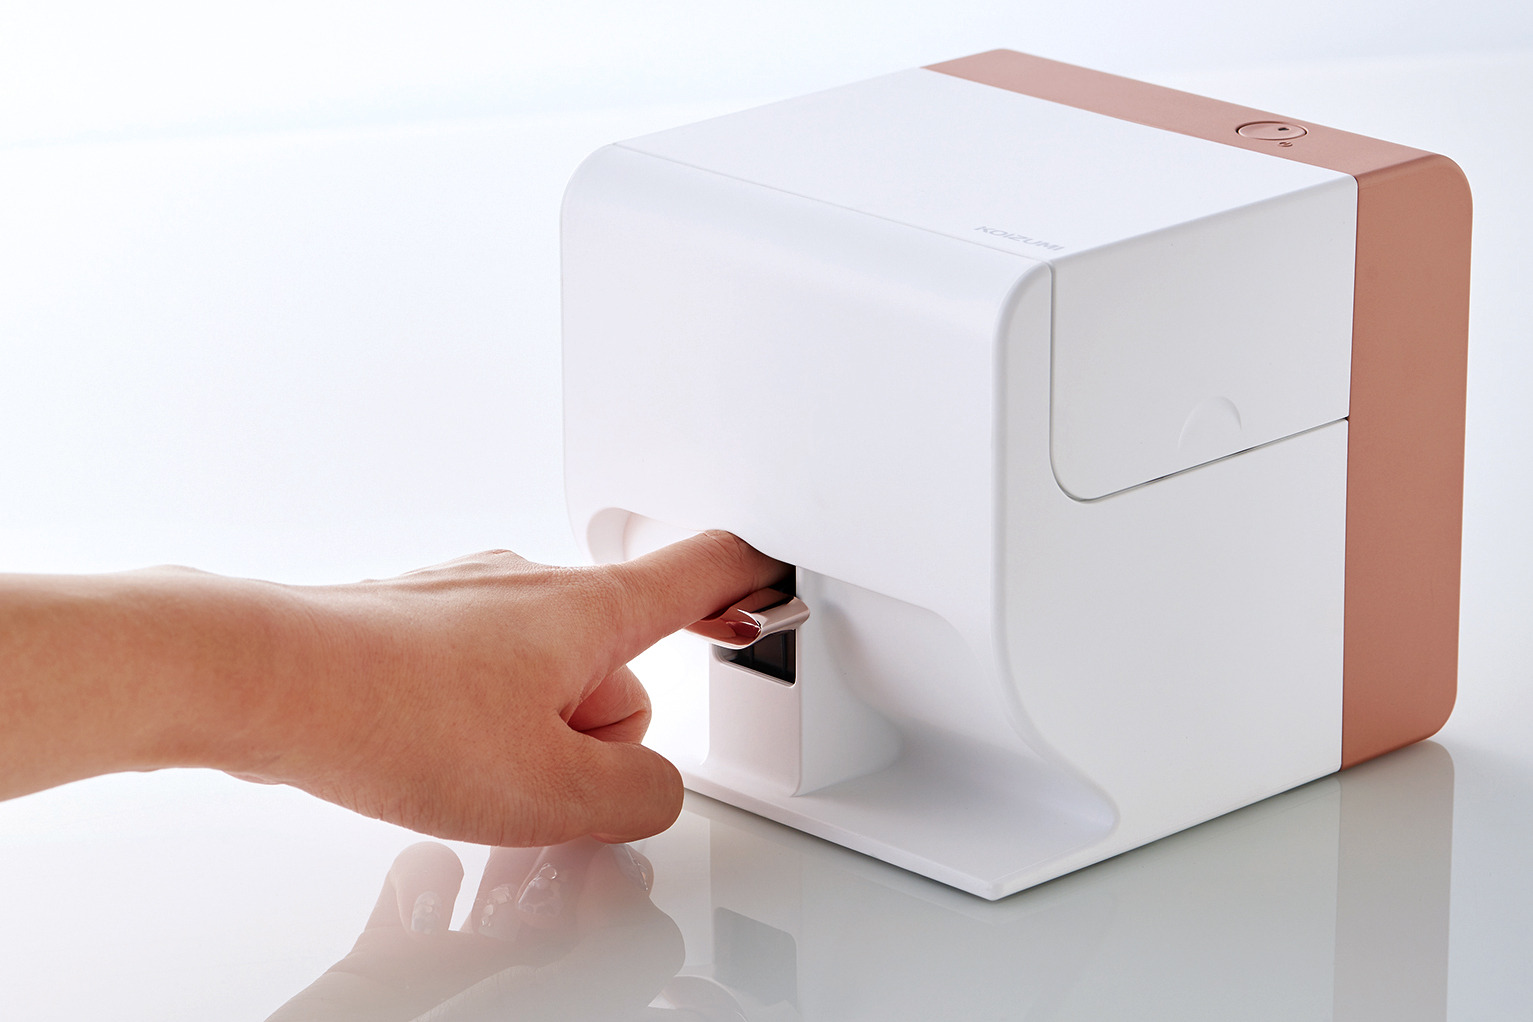 Replace Your Manicurist With This $500 Nail-Art Printer From Japan -  Bloomberg